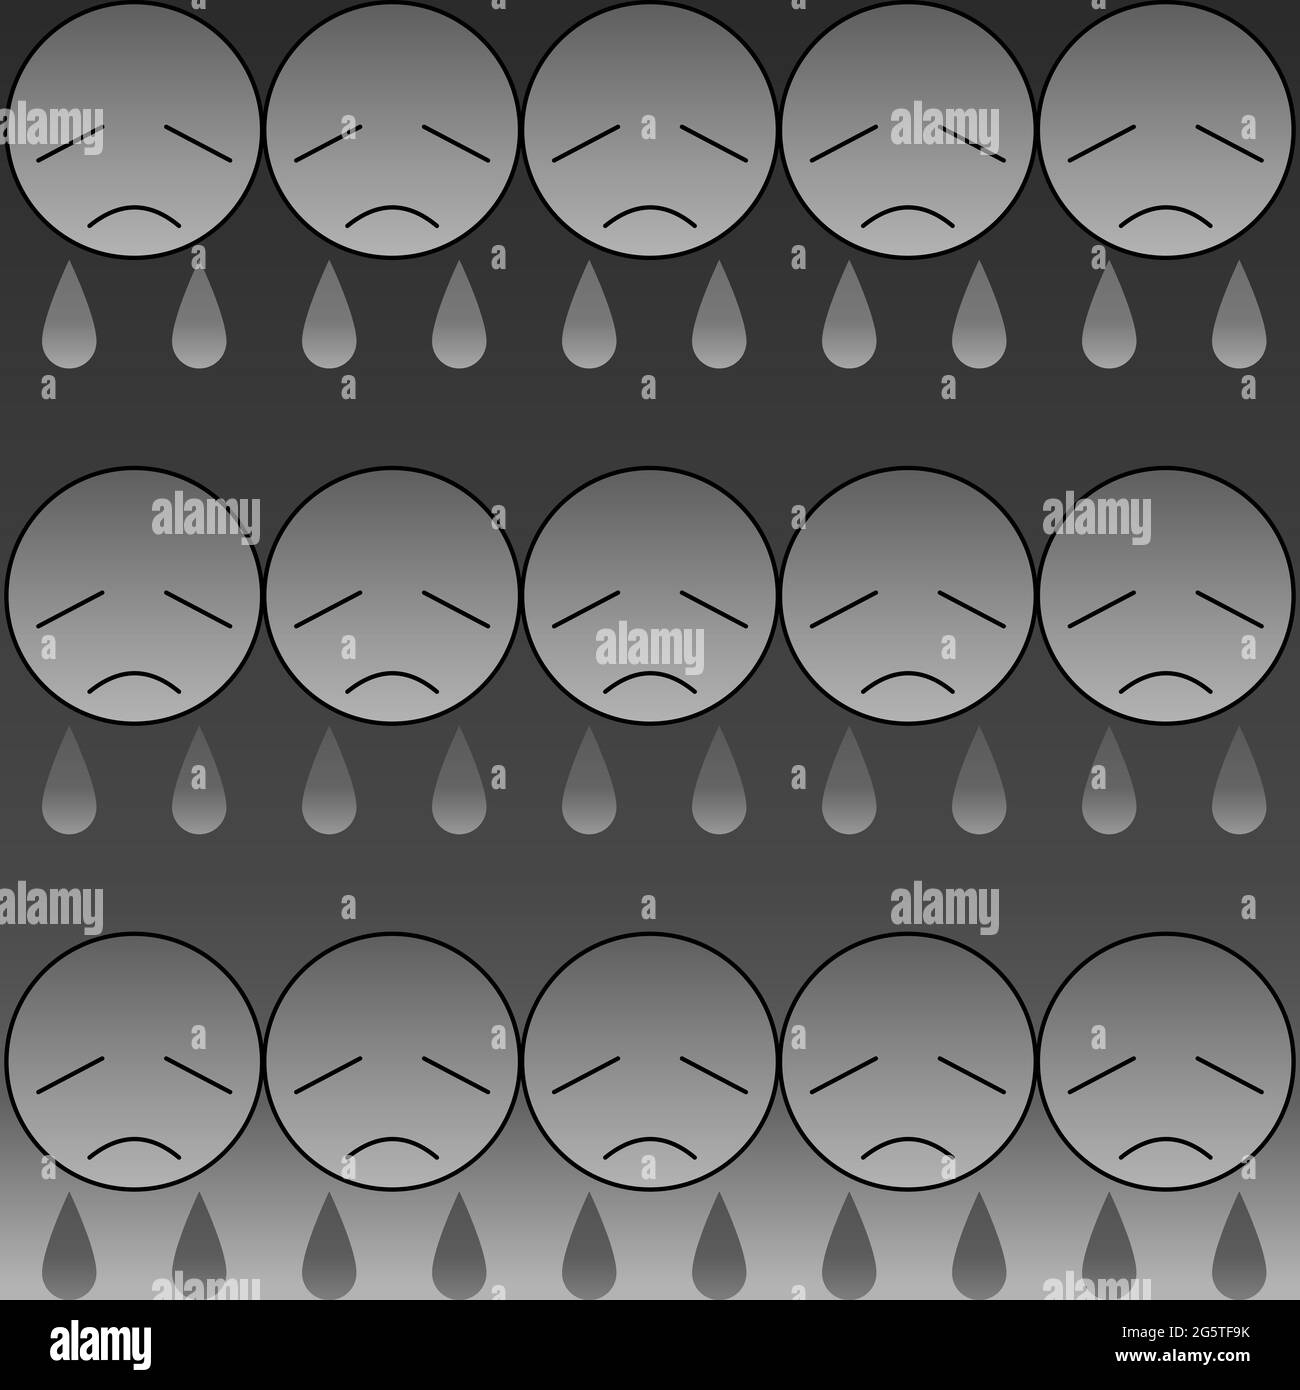 Sad emotional face in grayscale with teardrop 04 Stock Vector